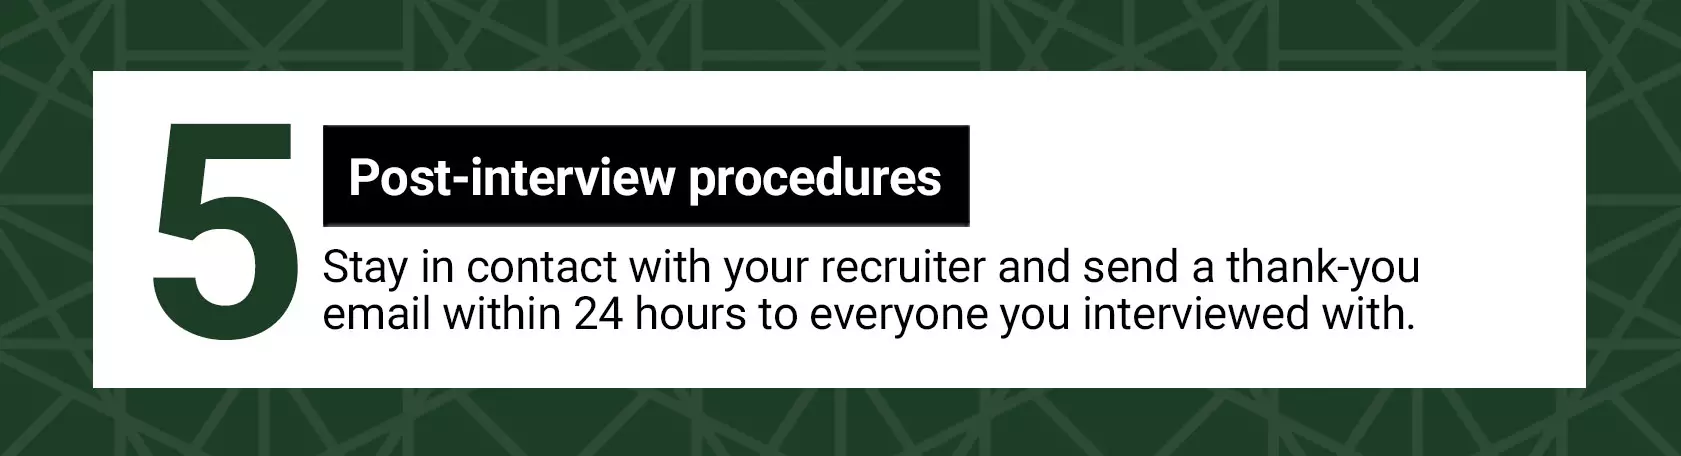 Post-interview procedures. Stay in contact with your recruiter and send a thank-you email within 24 hours to everyone you interviewed with.